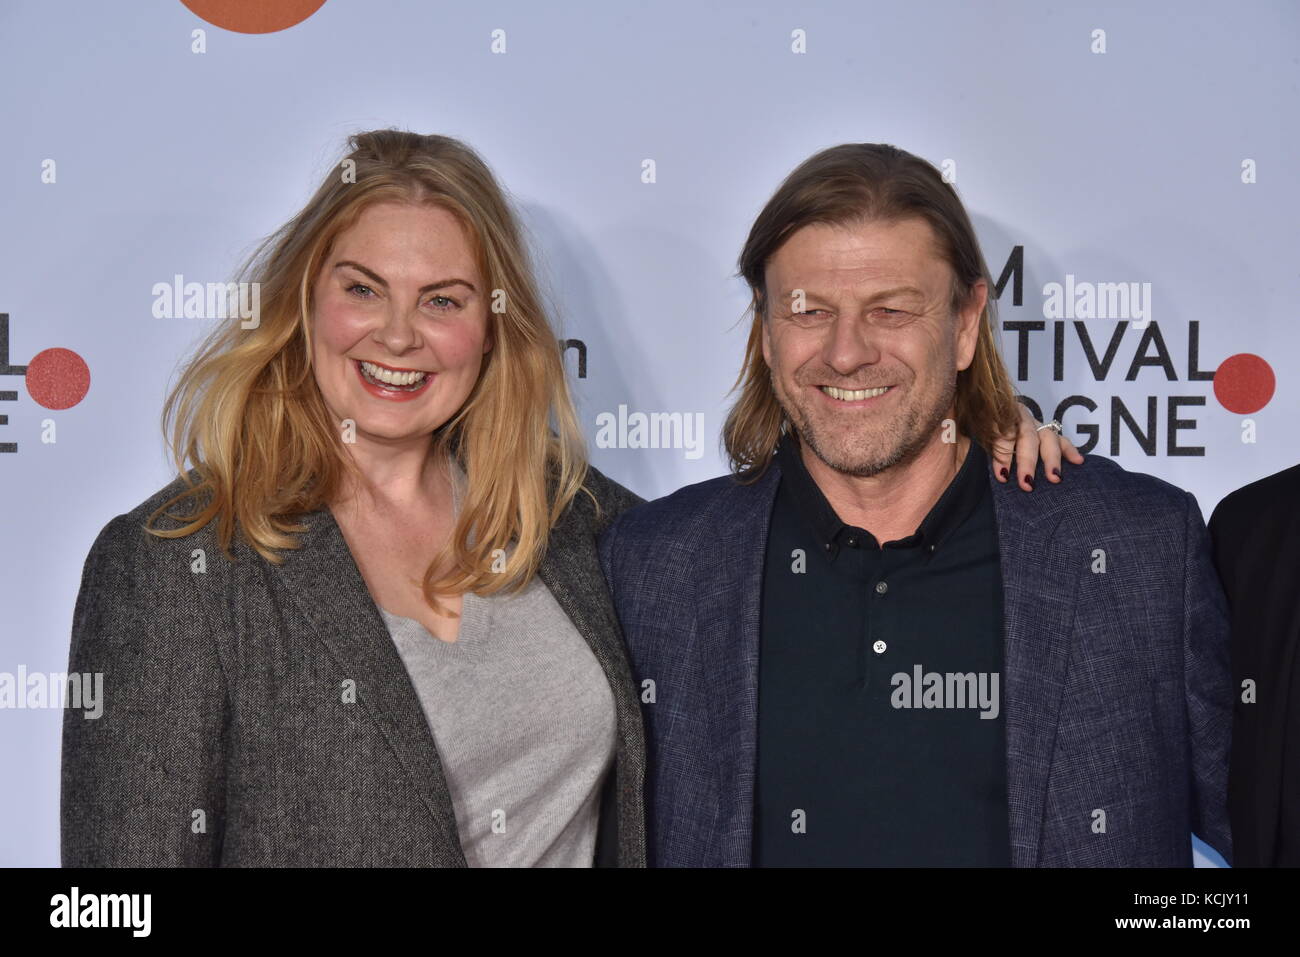 Cologne, Germany. 5th Oct, 2017. The British actor Sean Bean and his wife Ashley Moore can be seen on the red carpet before the screening of the film 'Broken' during the Film Festival Cologne 2017 in Cologne, Germany, 5 October 2017. - NO WIRE SERVICE - Credit: Horst Galuschka/dpa/Horst Galuschka dpa/Alamy Live News Stock Photo